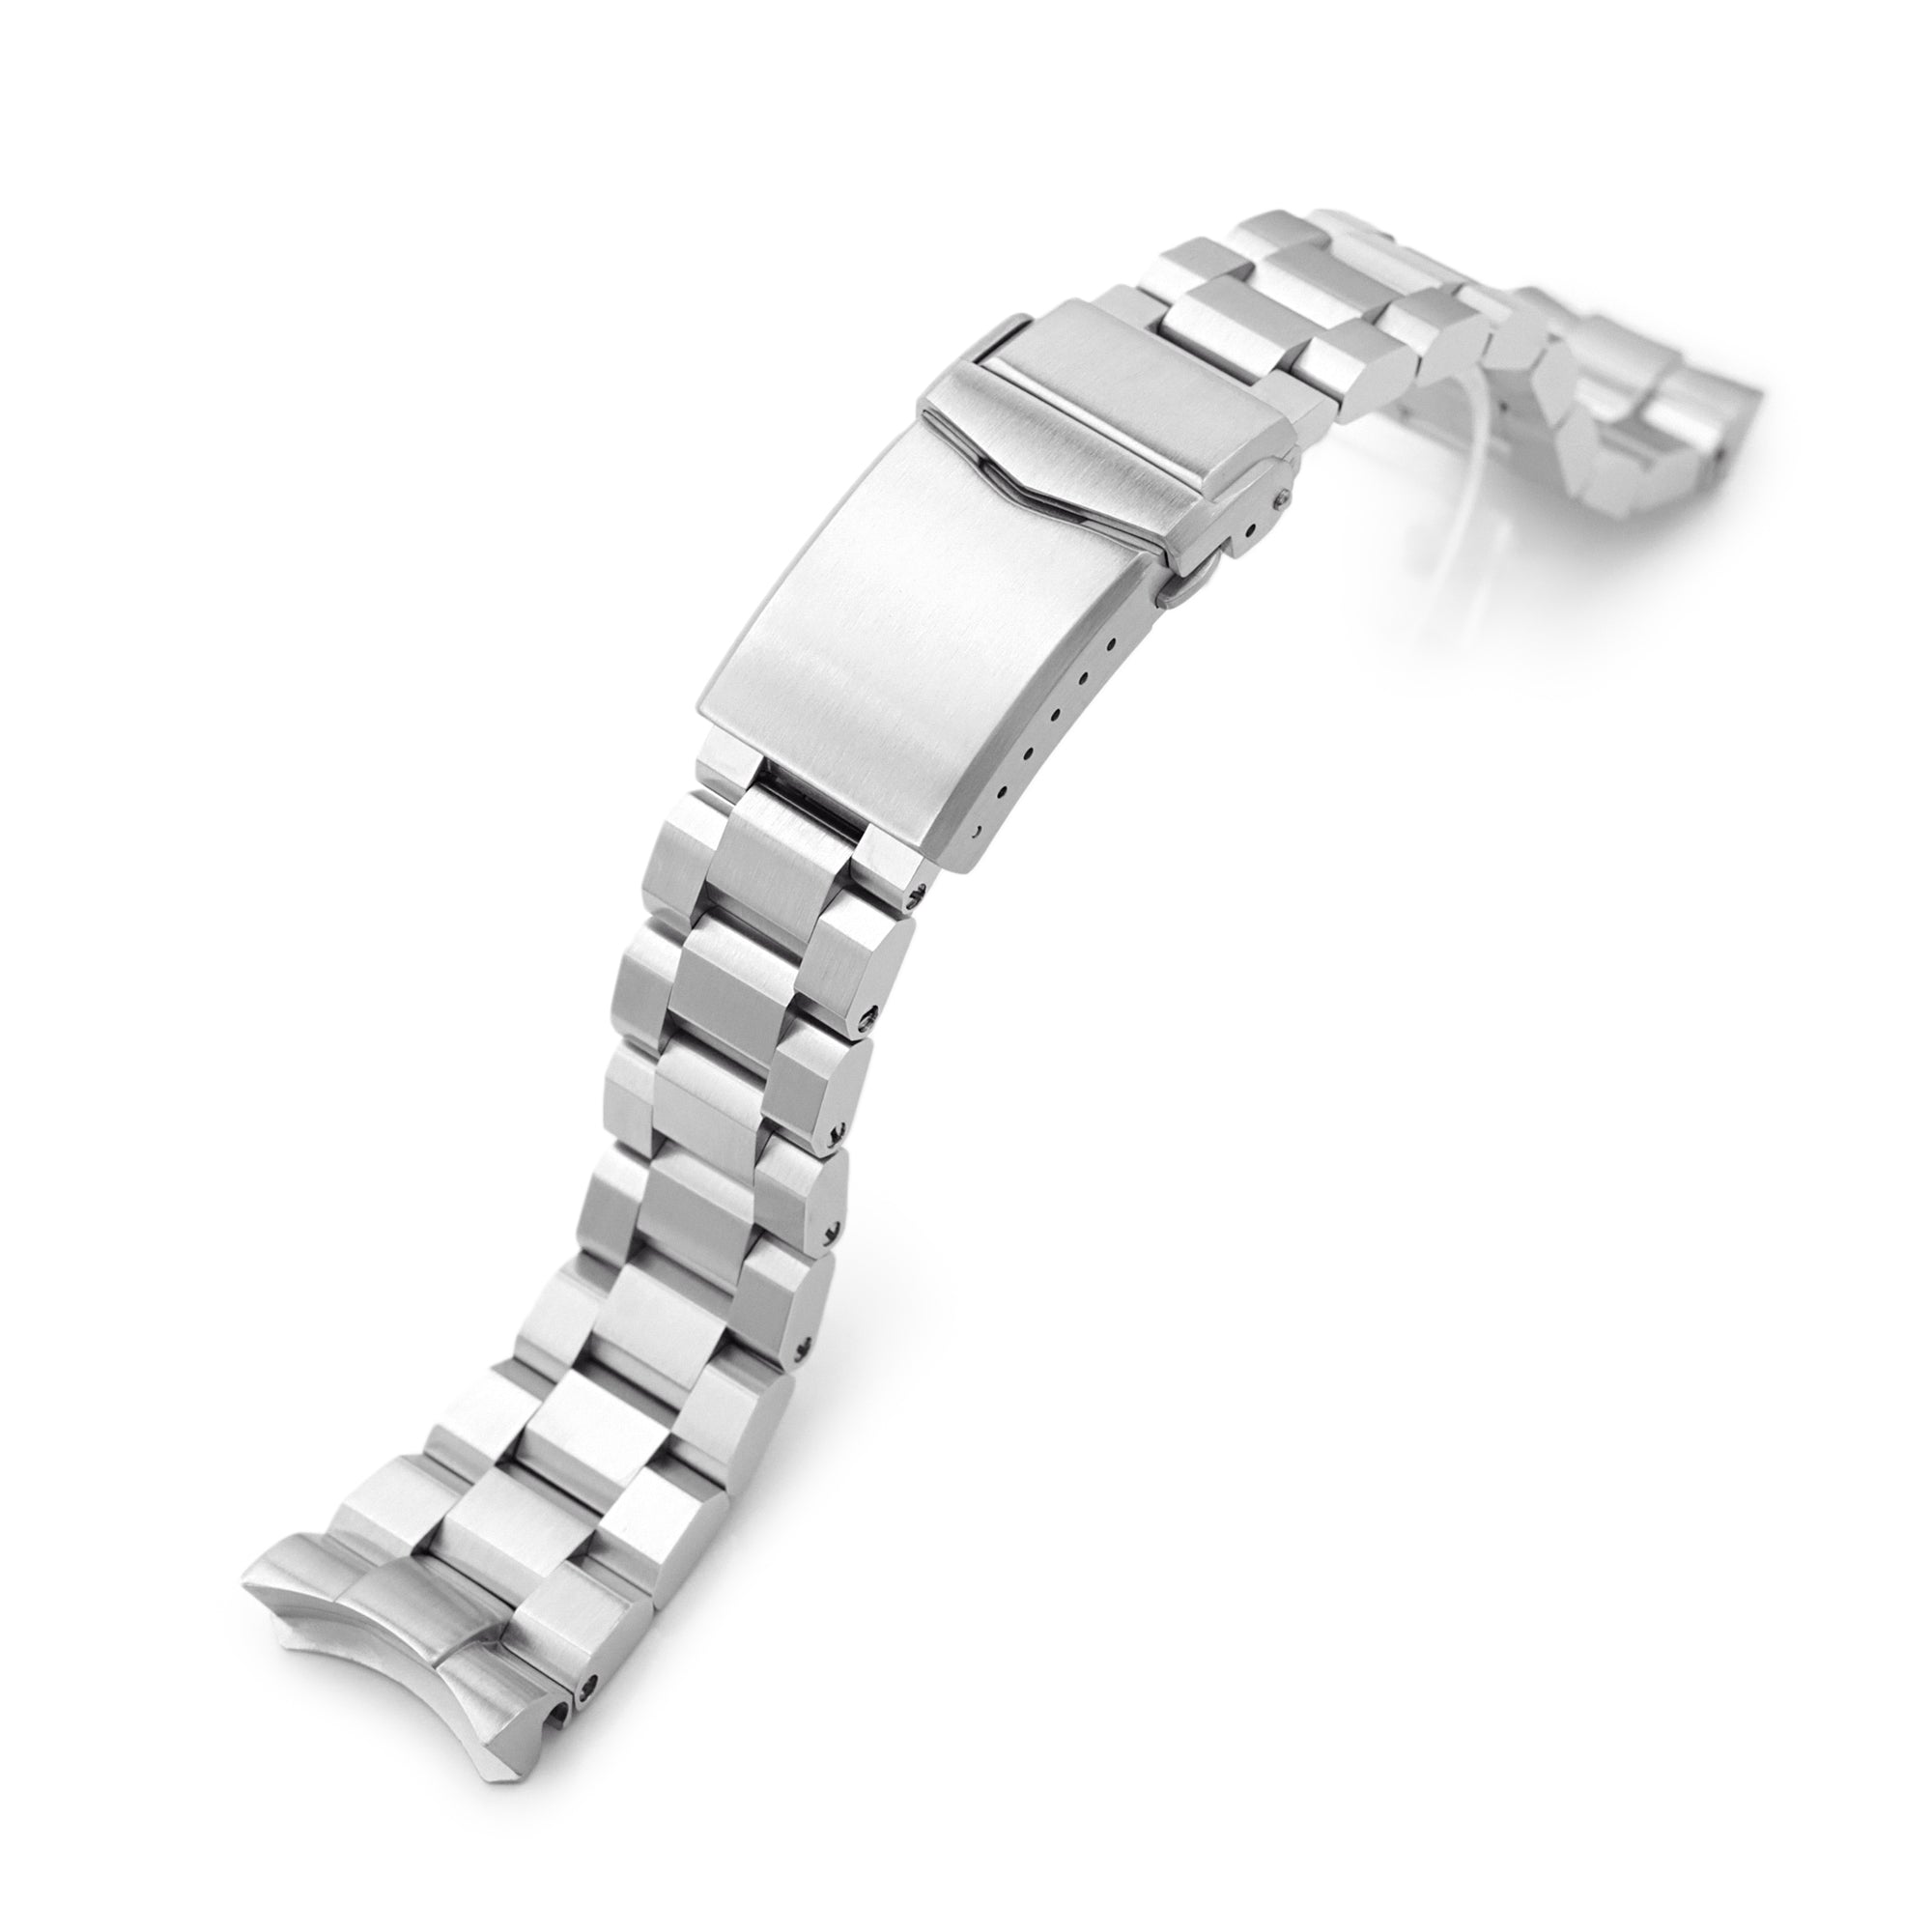 22mm Hexad Watch Band compatible with Seiko SKX007, 316L Stainless Steel V-Clasp Button Double Lock Strapcode Watch Bands